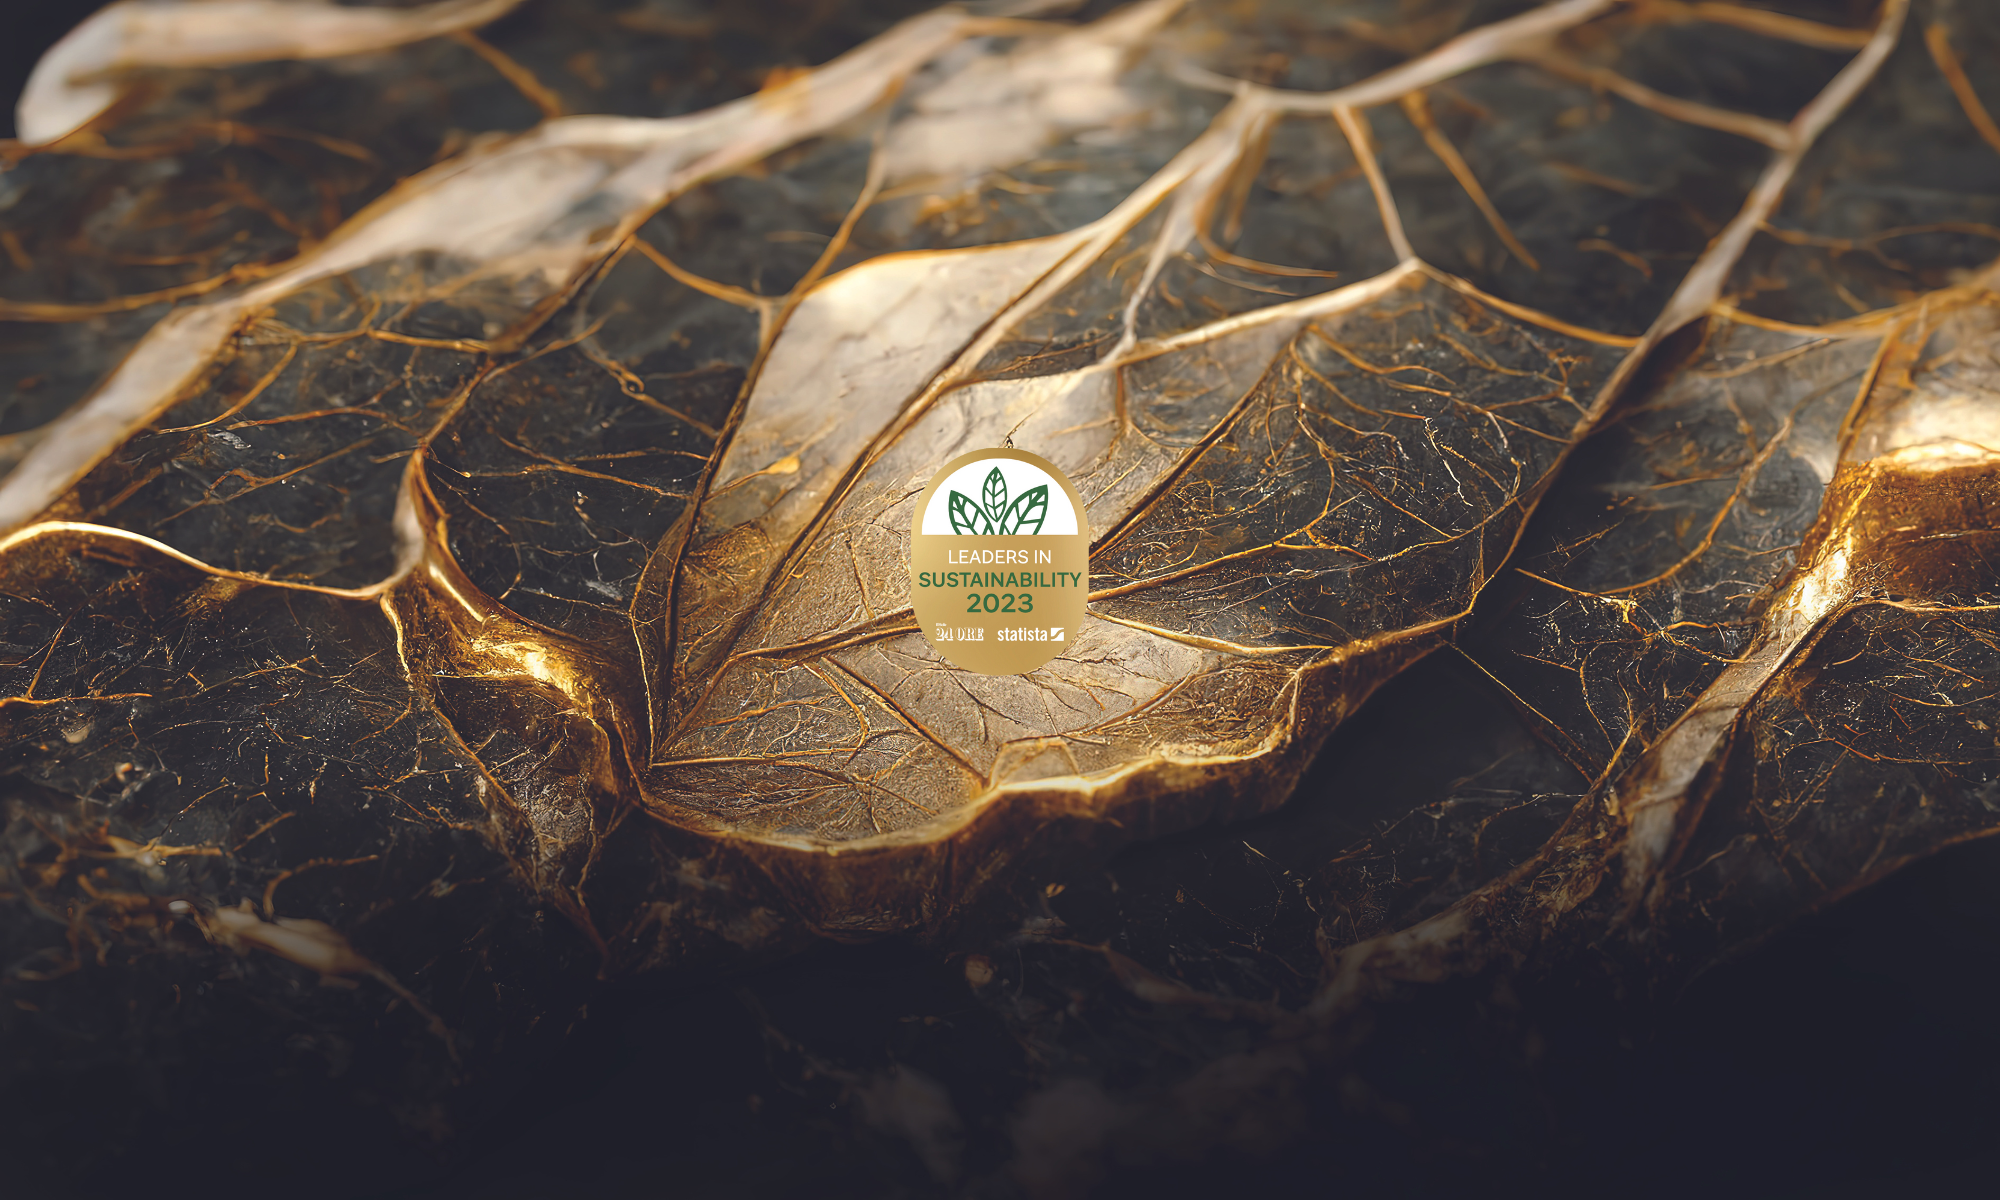 logo of the 'Sustainability Leader 2023' award received by Italpreziosi on a background of autumn leaves